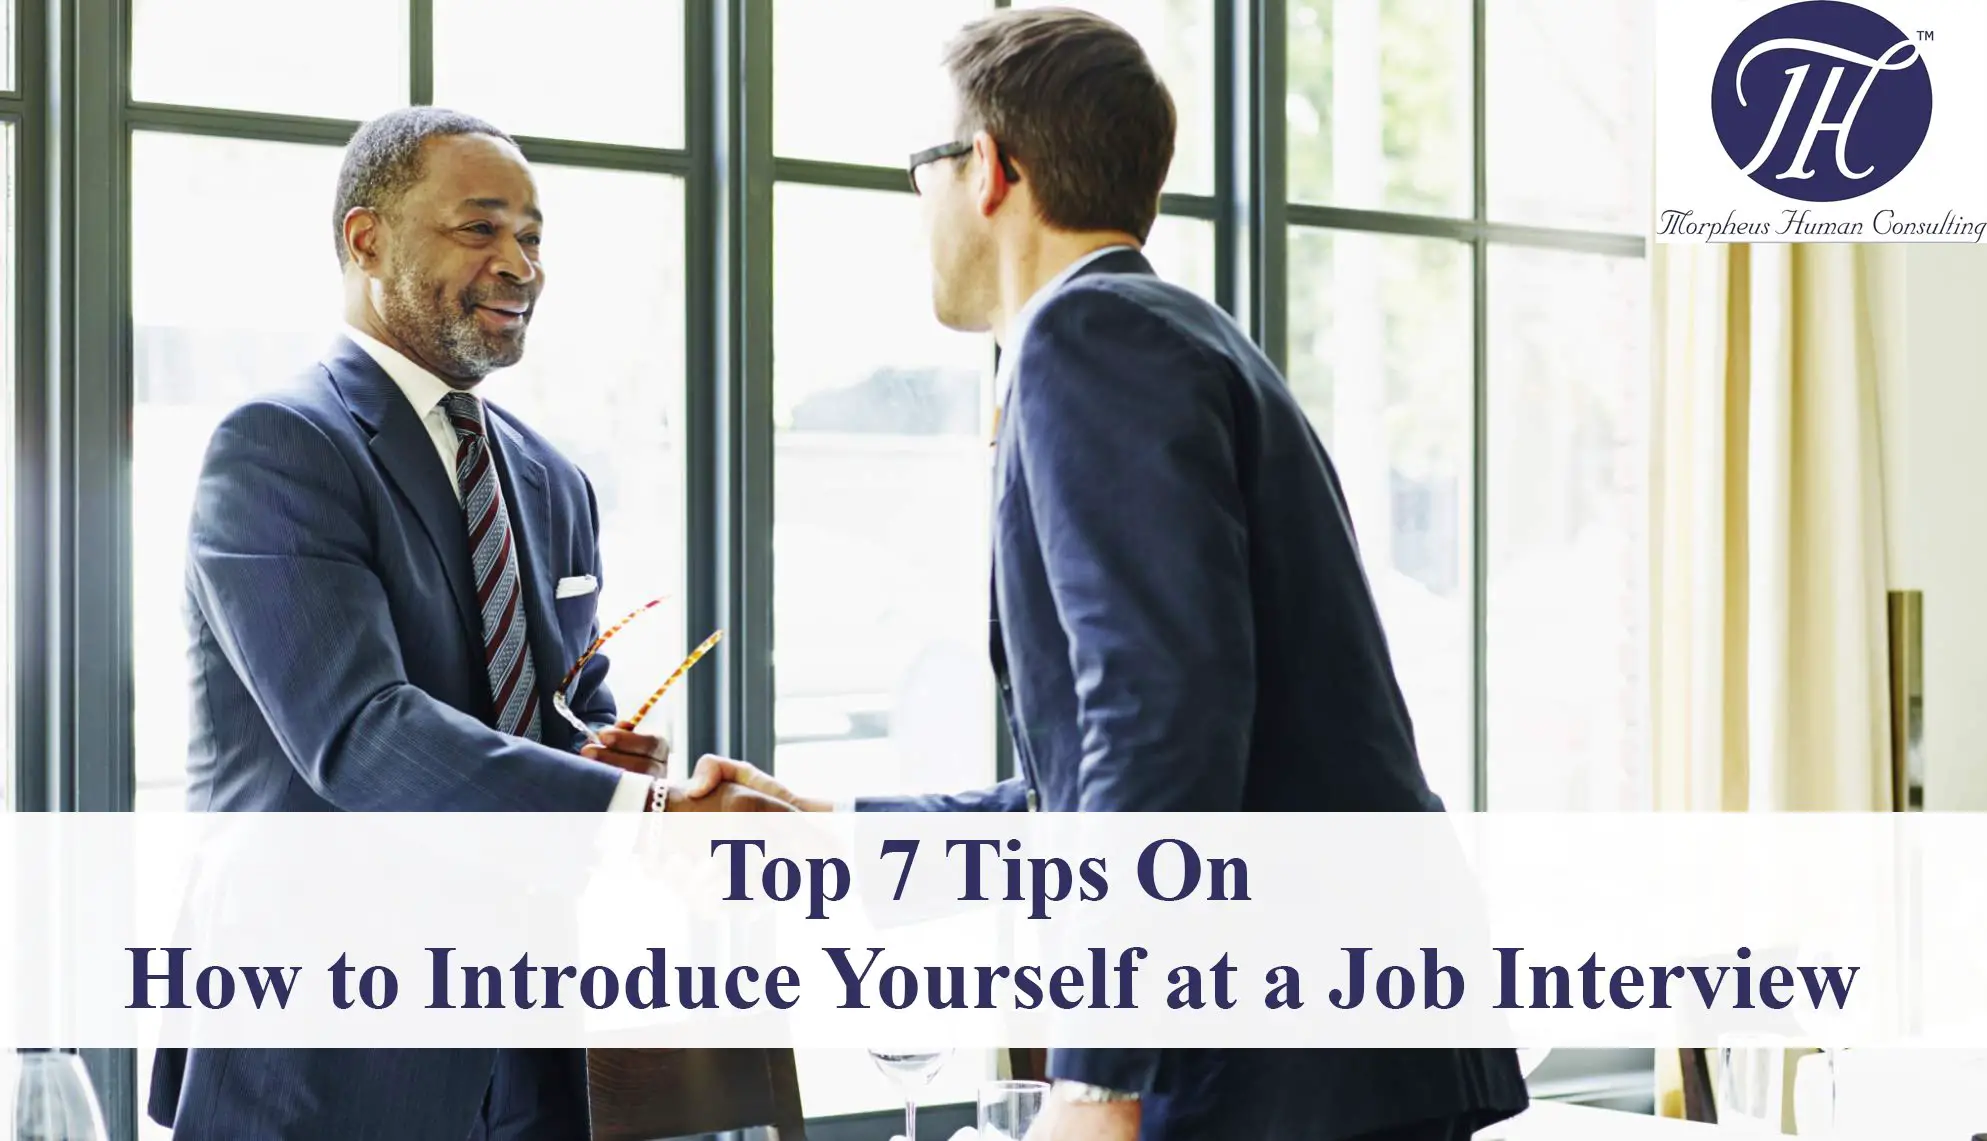 Top 7 Tips On How to Introduce Yourself at a Job Interview ...